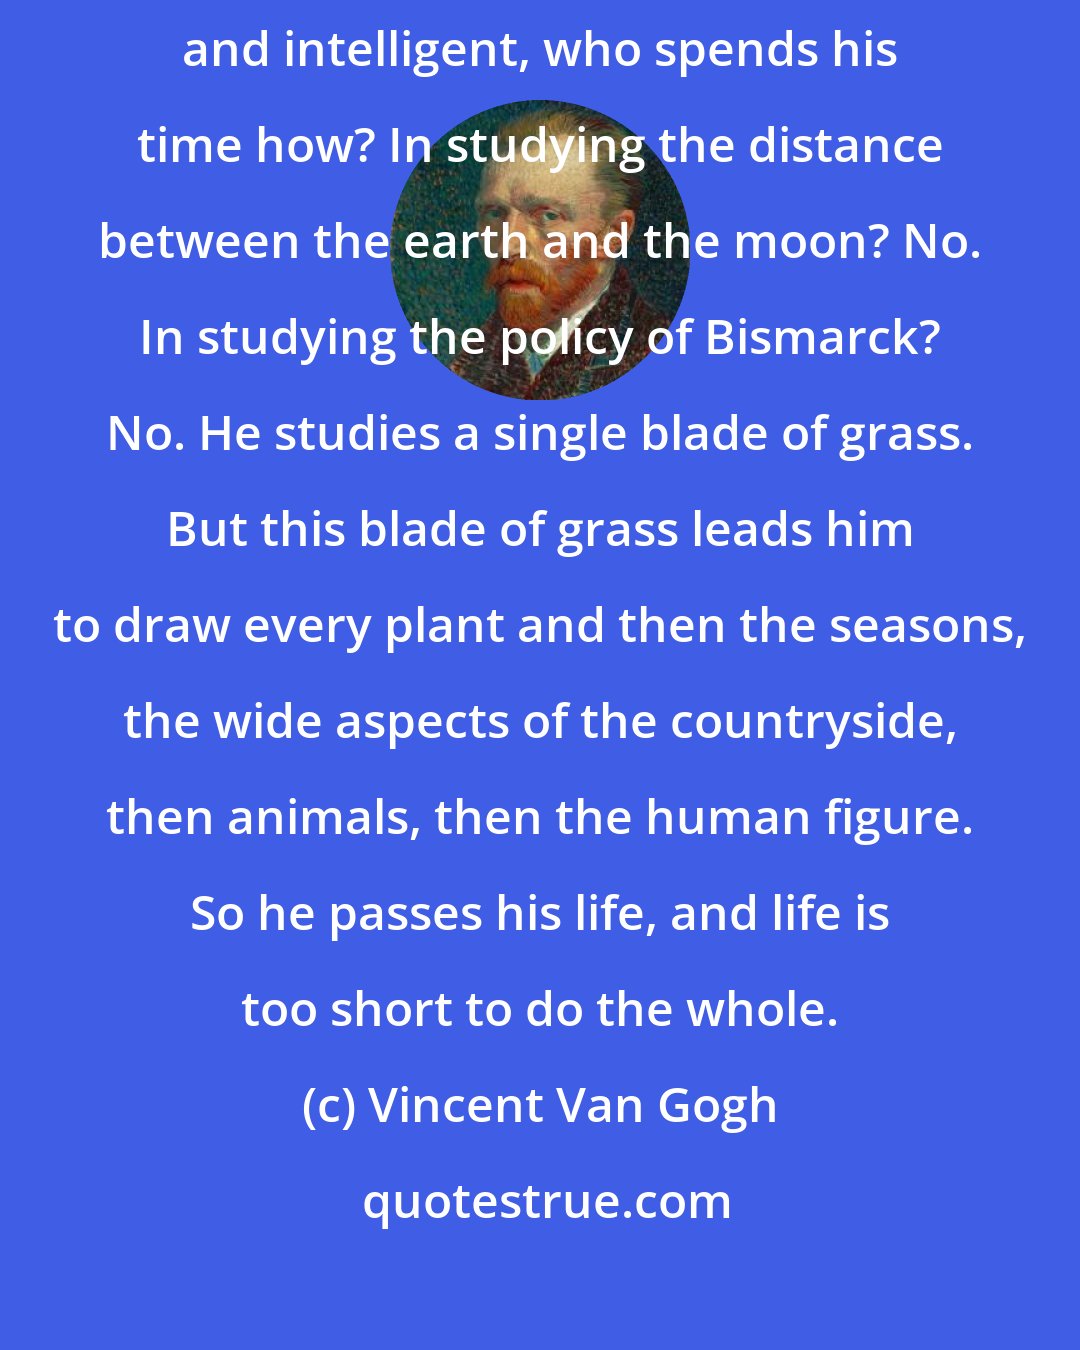 Vincent Van Gogh: If you study Japanese art you see a man who is undoubtedly wise, philosophic and intelligent, who spends his time how? In studying the distance between the earth and the moon? No. In studying the policy of Bismarck? No. He studies a single blade of grass. But this blade of grass leads him to draw every plant and then the seasons, the wide aspects of the countryside, then animals, then the human figure. So he passes his life, and life is too short to do the whole.